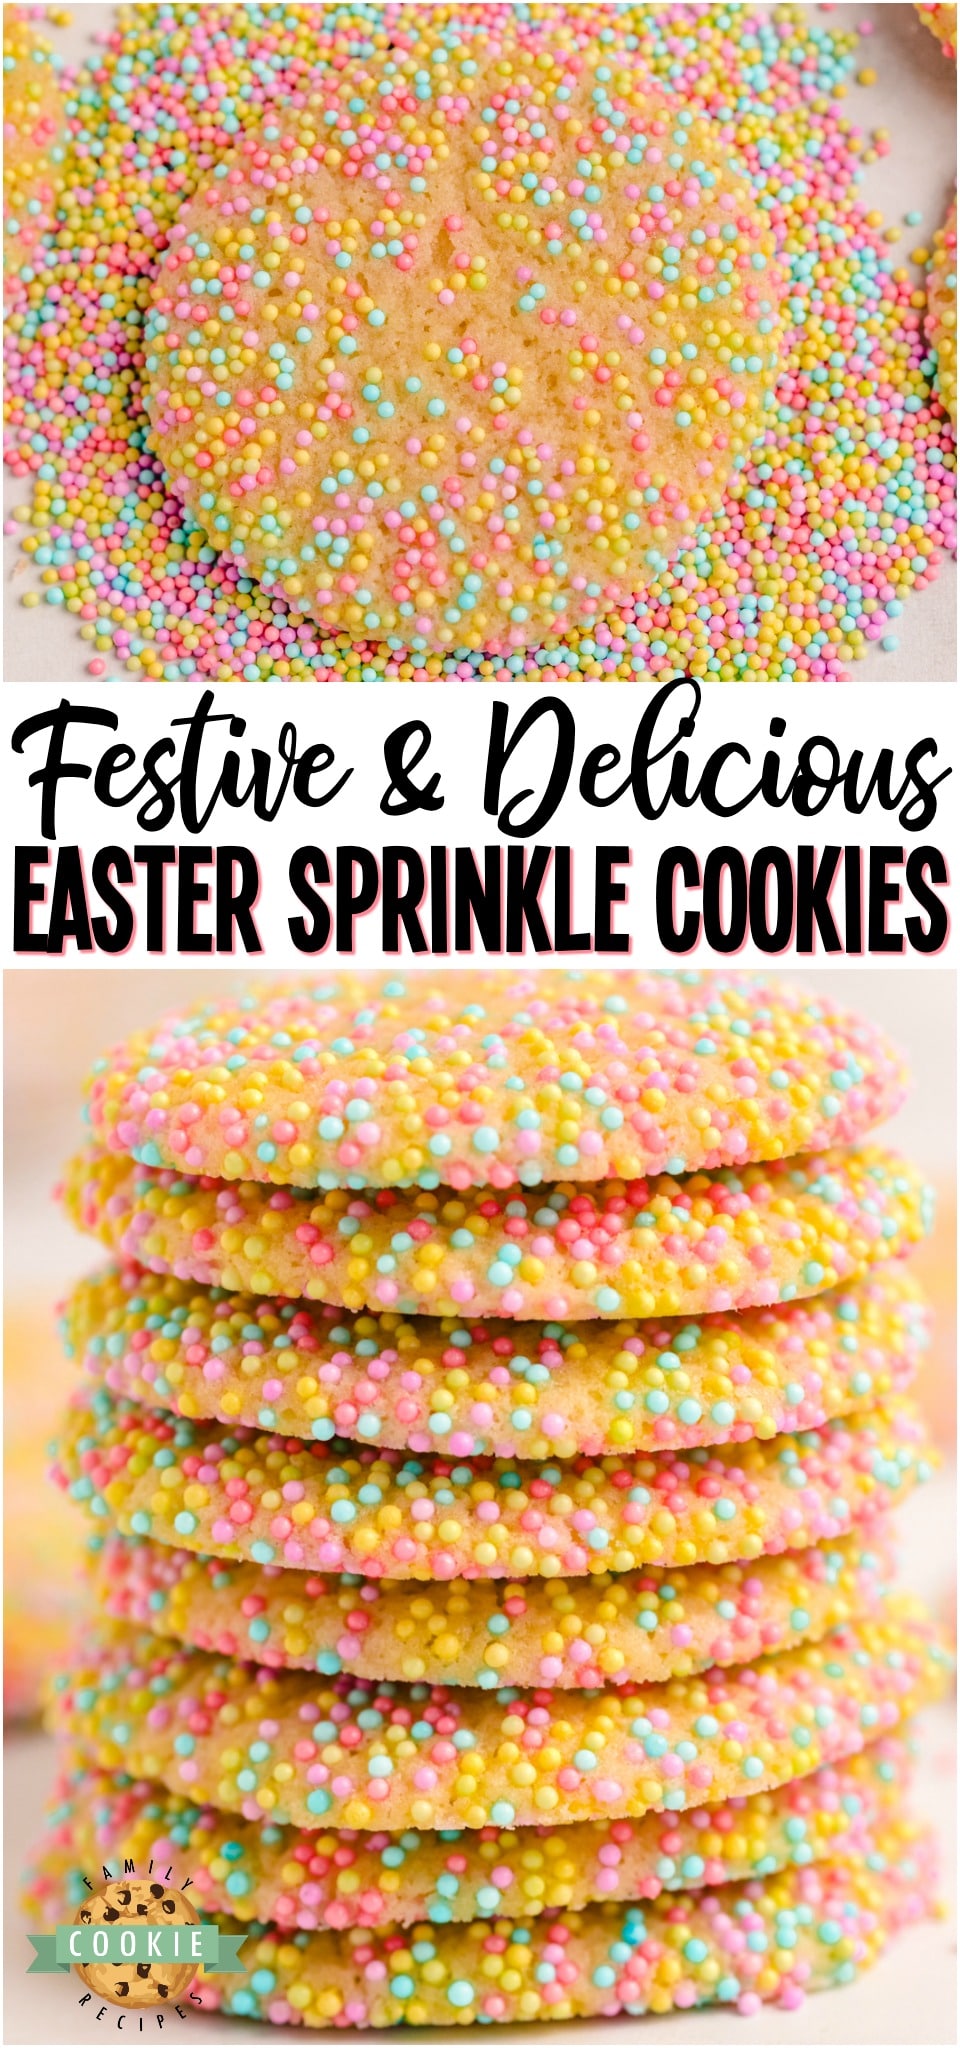 Easter Sprinkle Cookies are a great way to celebrate the holiday with a sweet treat. The colorful sprinkles on a soft and chewy sugar cookie make for a delicious snack that looks as good as it tastes! #Easter #Spring #summer #cookies #baking #Sprinkles #SprinkleCookies #cookies #dessert from FAMILY COOKIE RECIPES via @buttergirls